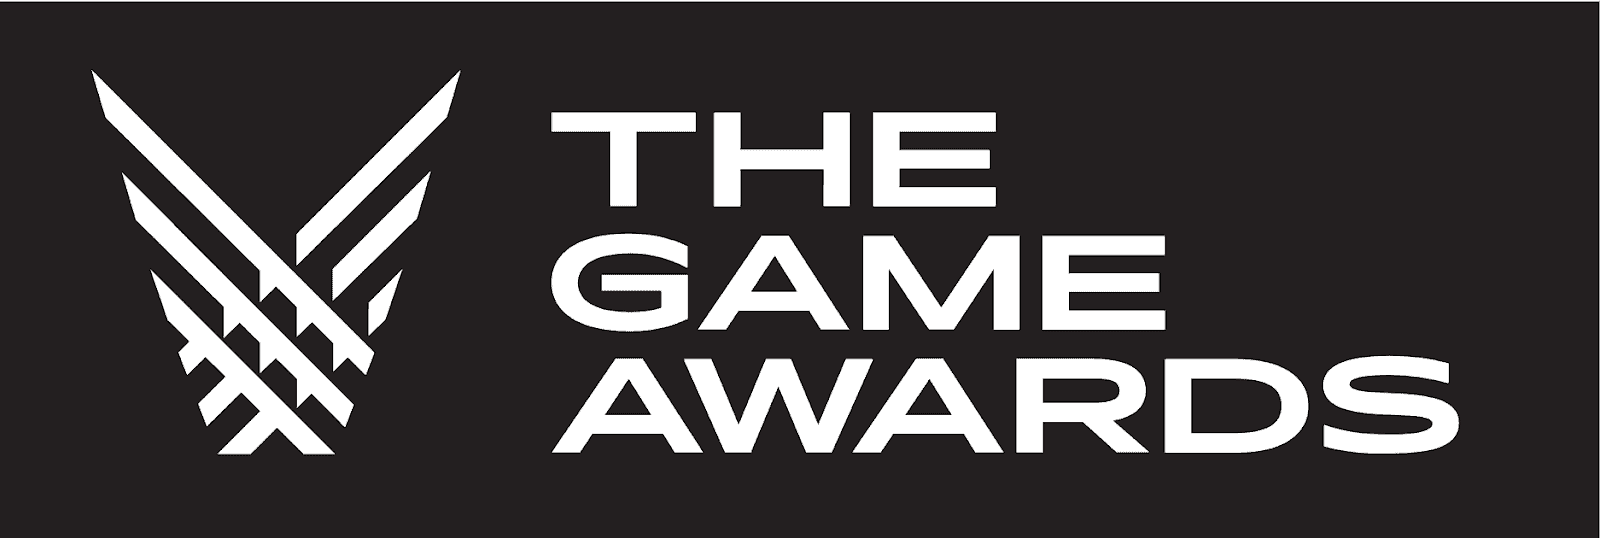 White “The Game Awards” text and logo on black background